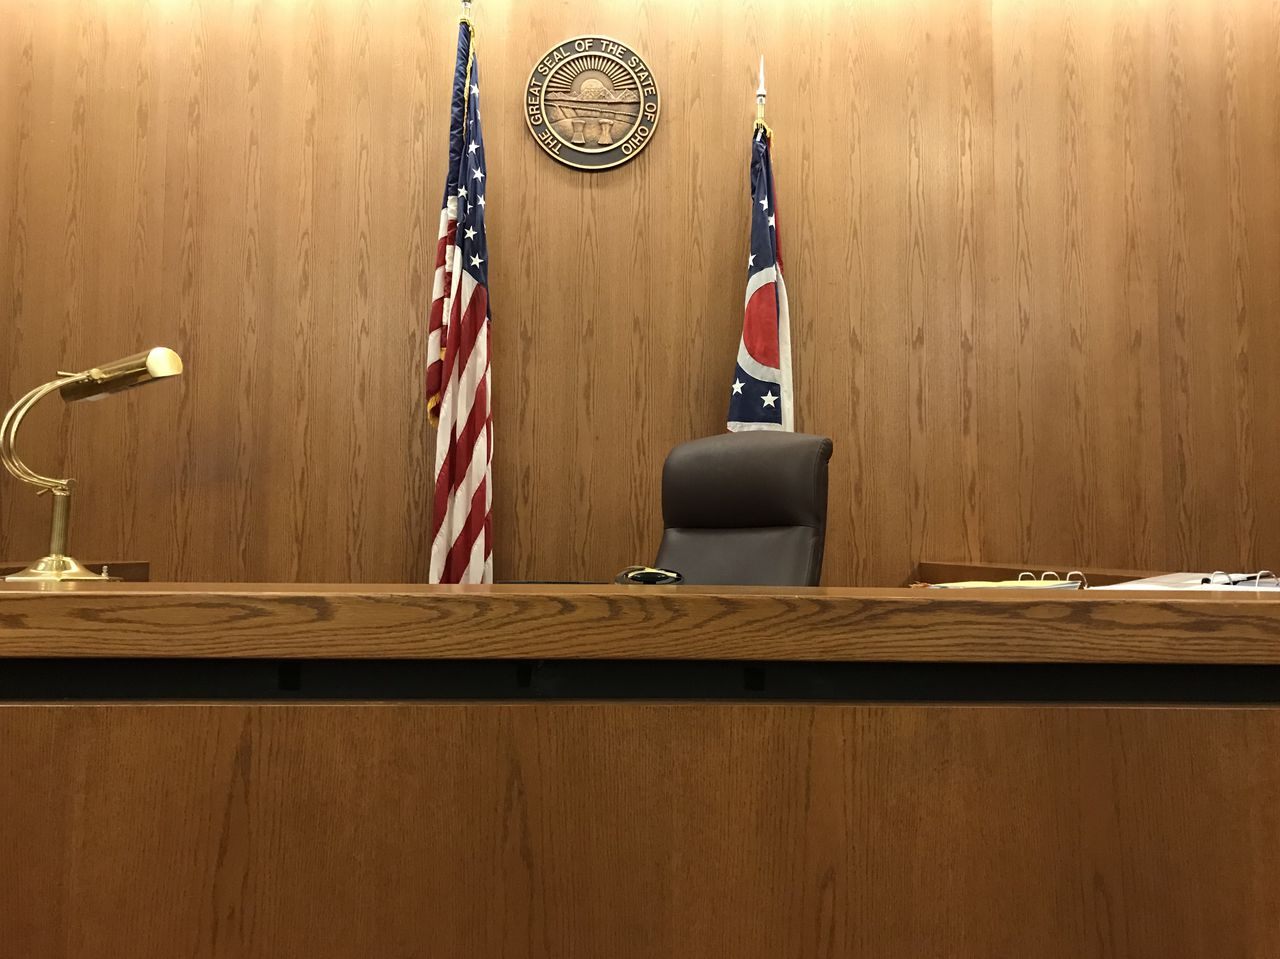 Judge Sets 150 000 Bond For Canton Man Accused Of Committing Five